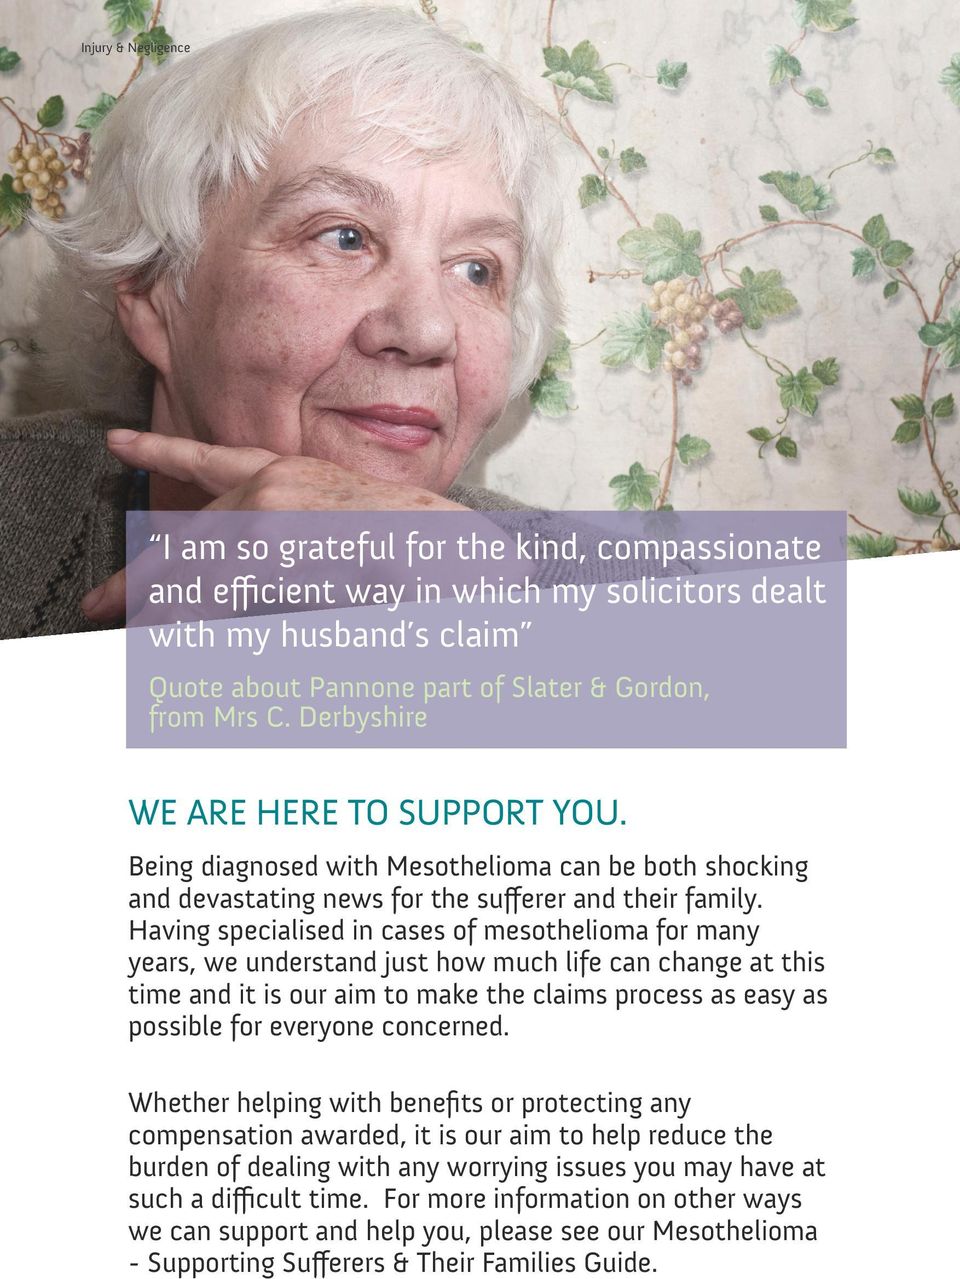 Having specialised in cases of mesothelioma for many years, we understand just how much life can change at this time and it is our aim to make the claims process as easy as possible for everyone